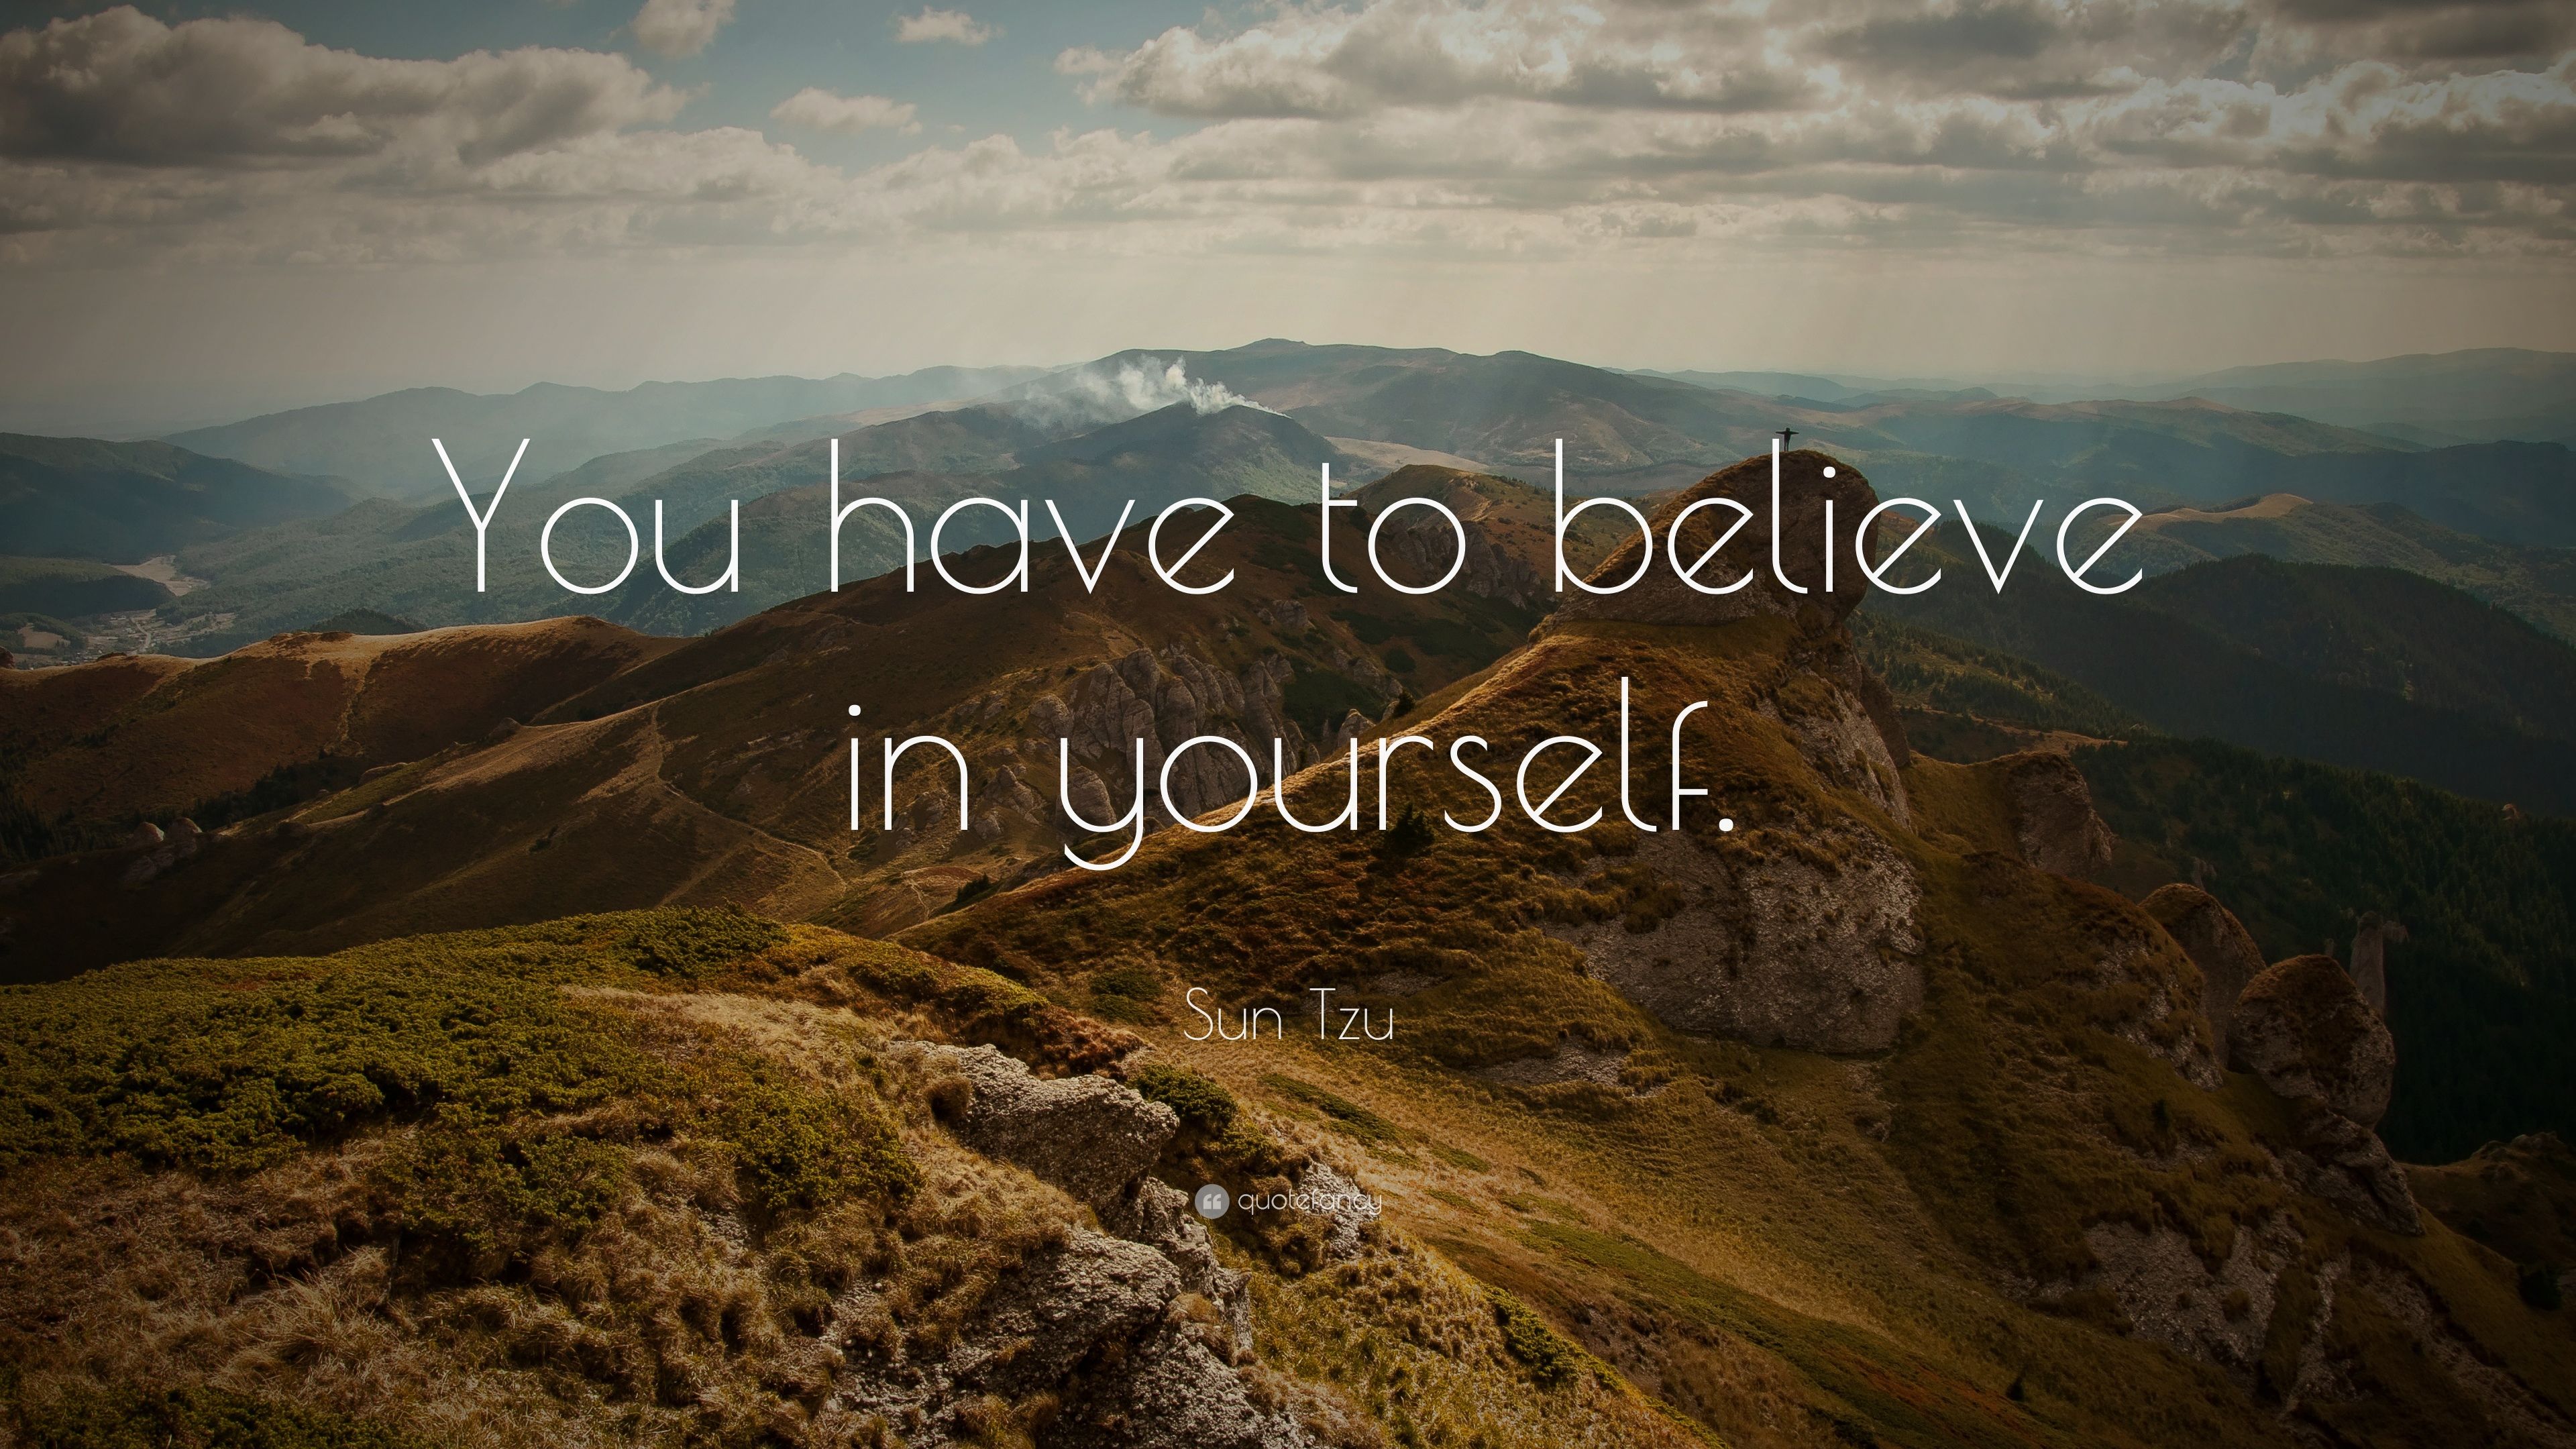 Sun Tzu Quote: “You have to believe in yourself. ” 23 wallpaper